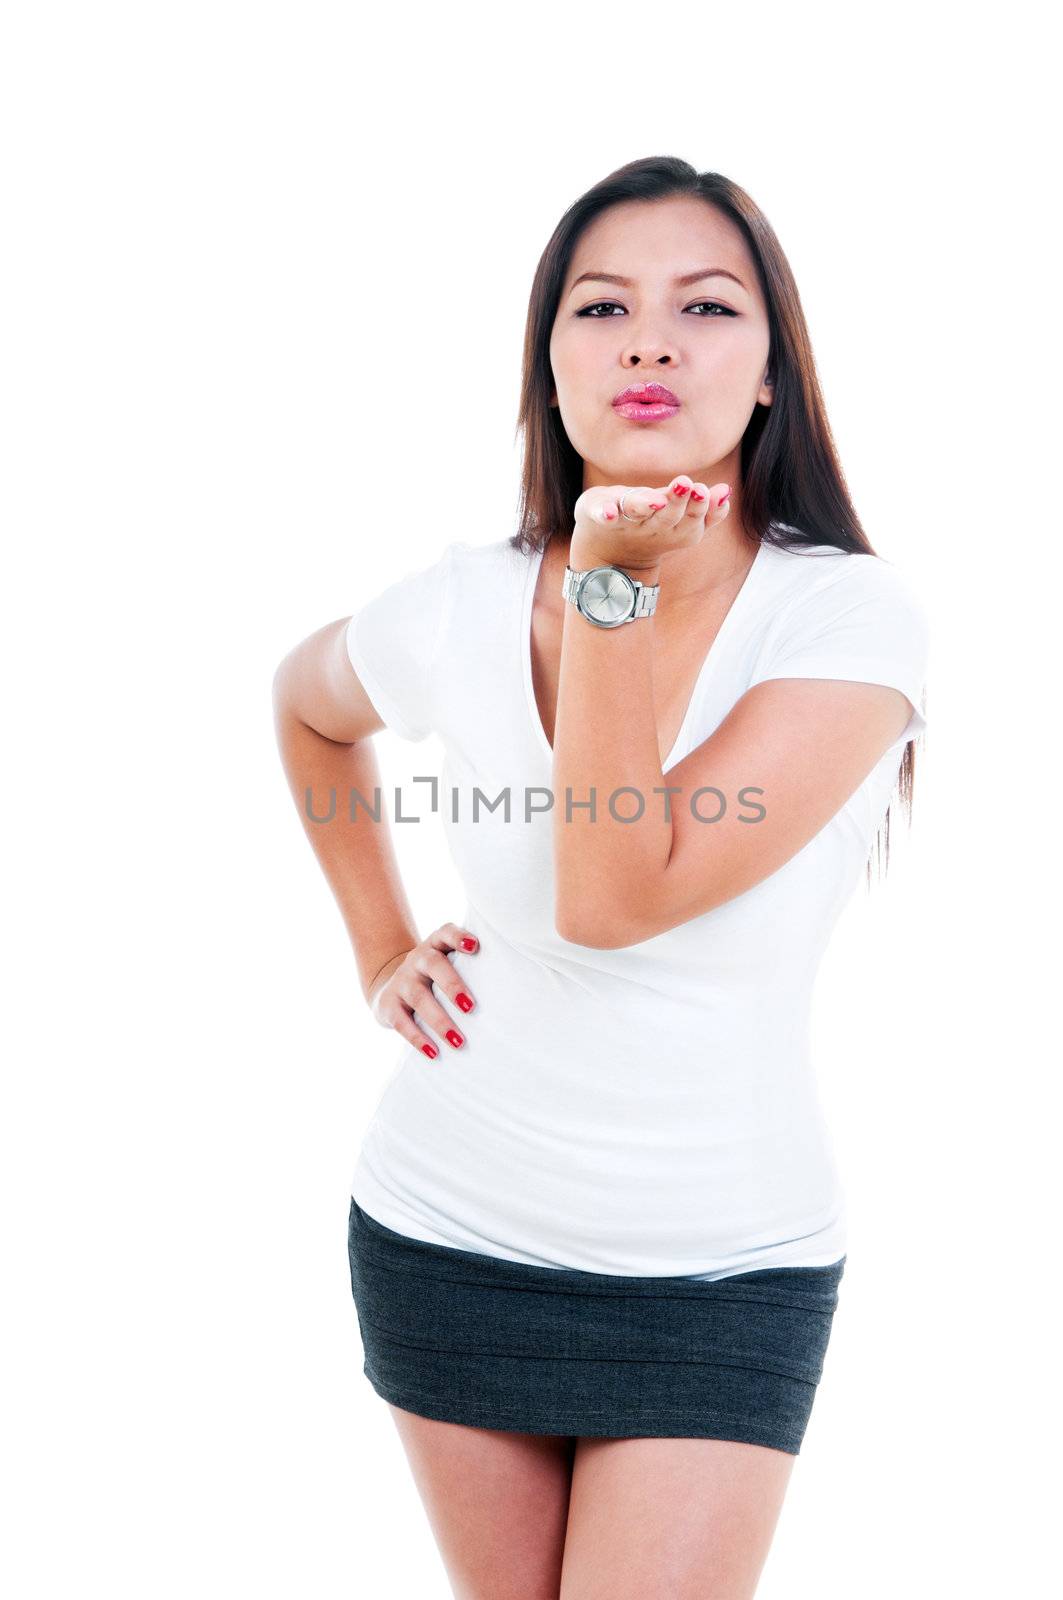 Portrait of cute young woman blowing a kiss, isolated on white.